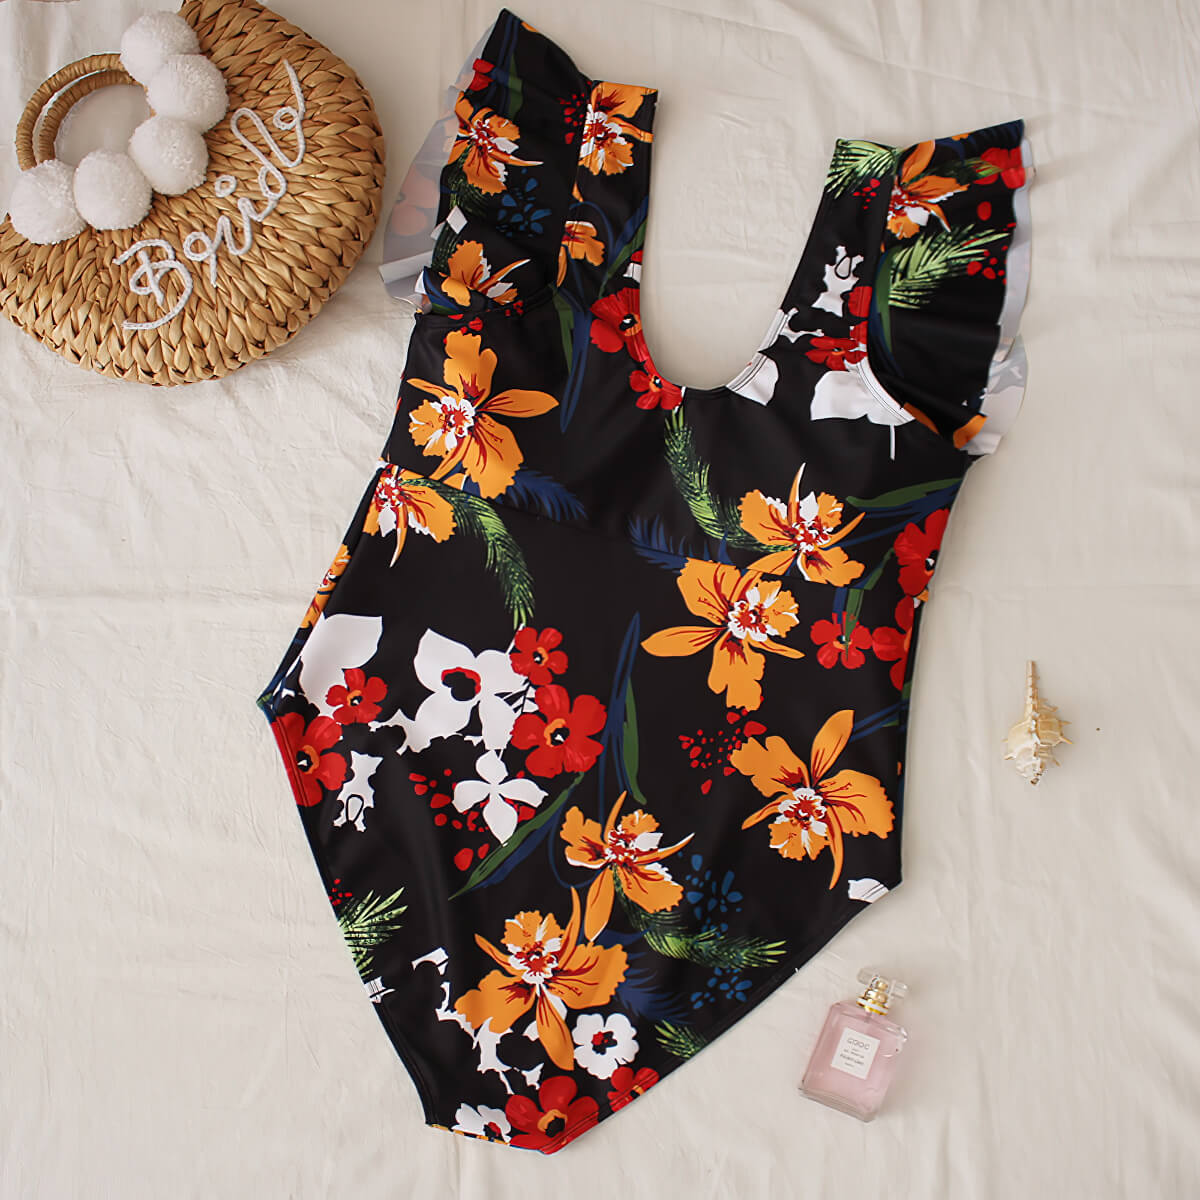 Plus Size Ruffle Swimsuit Flower Printed